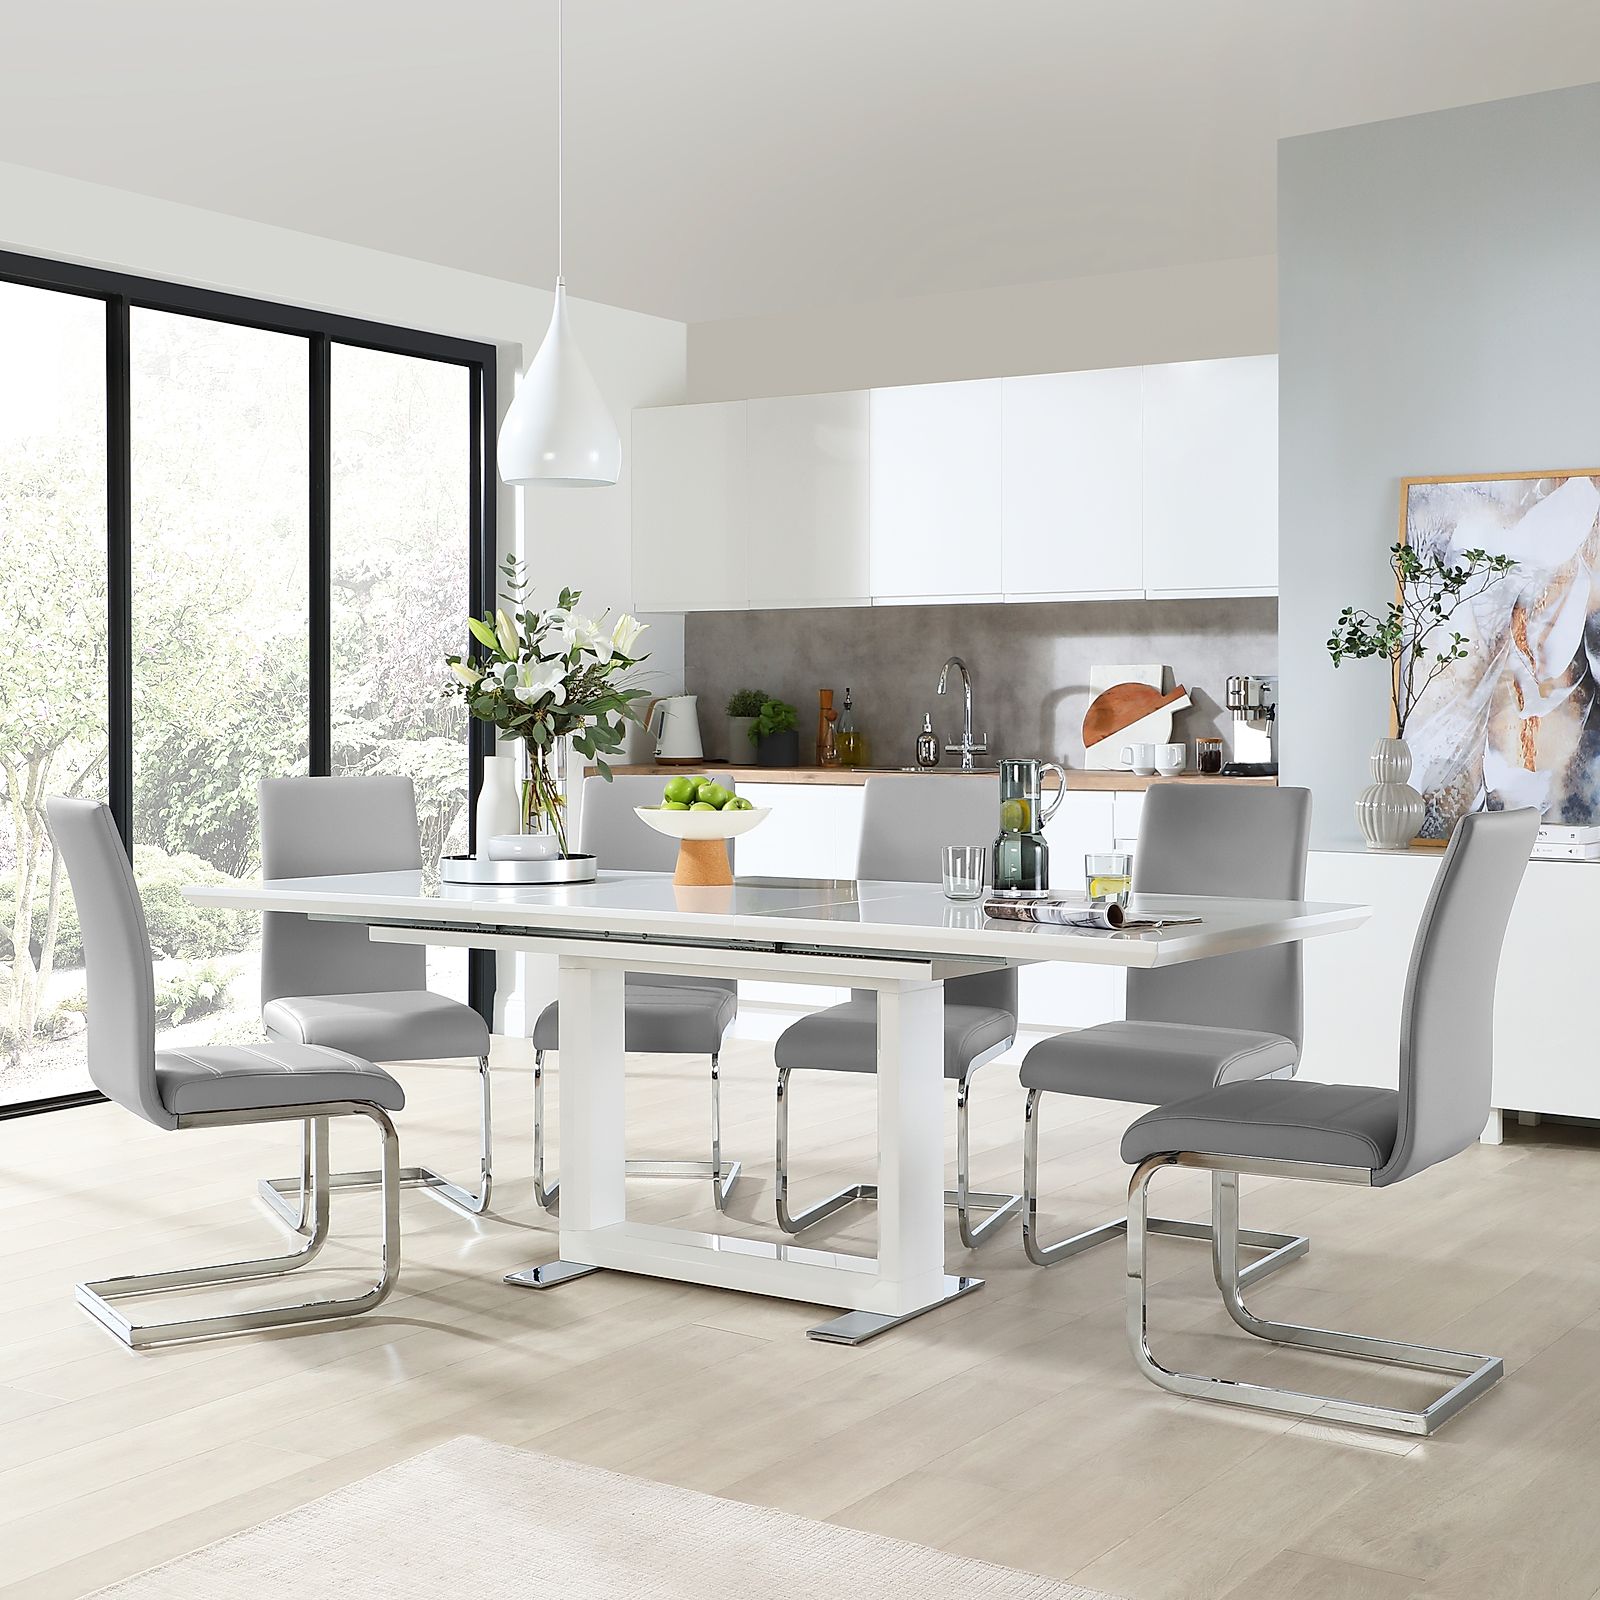 Tokyo White High Gloss Extending Dining Table with 8 Perth Light Grey